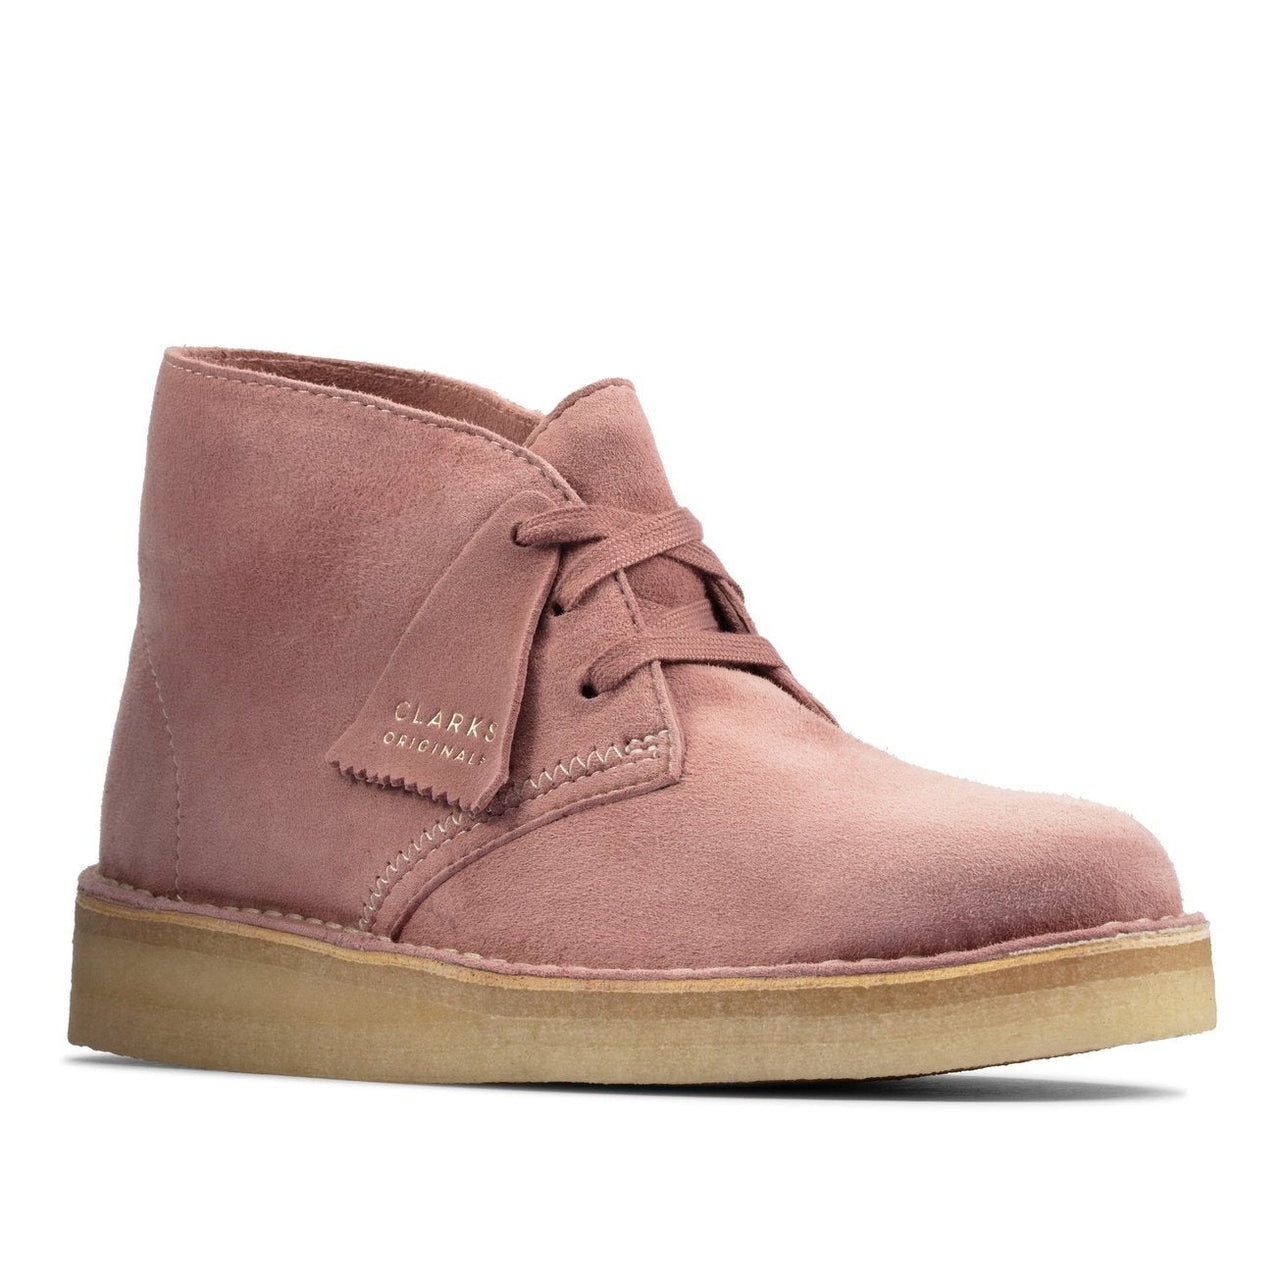 Stylish and comfortable dusty pink suede shoes by Clarks